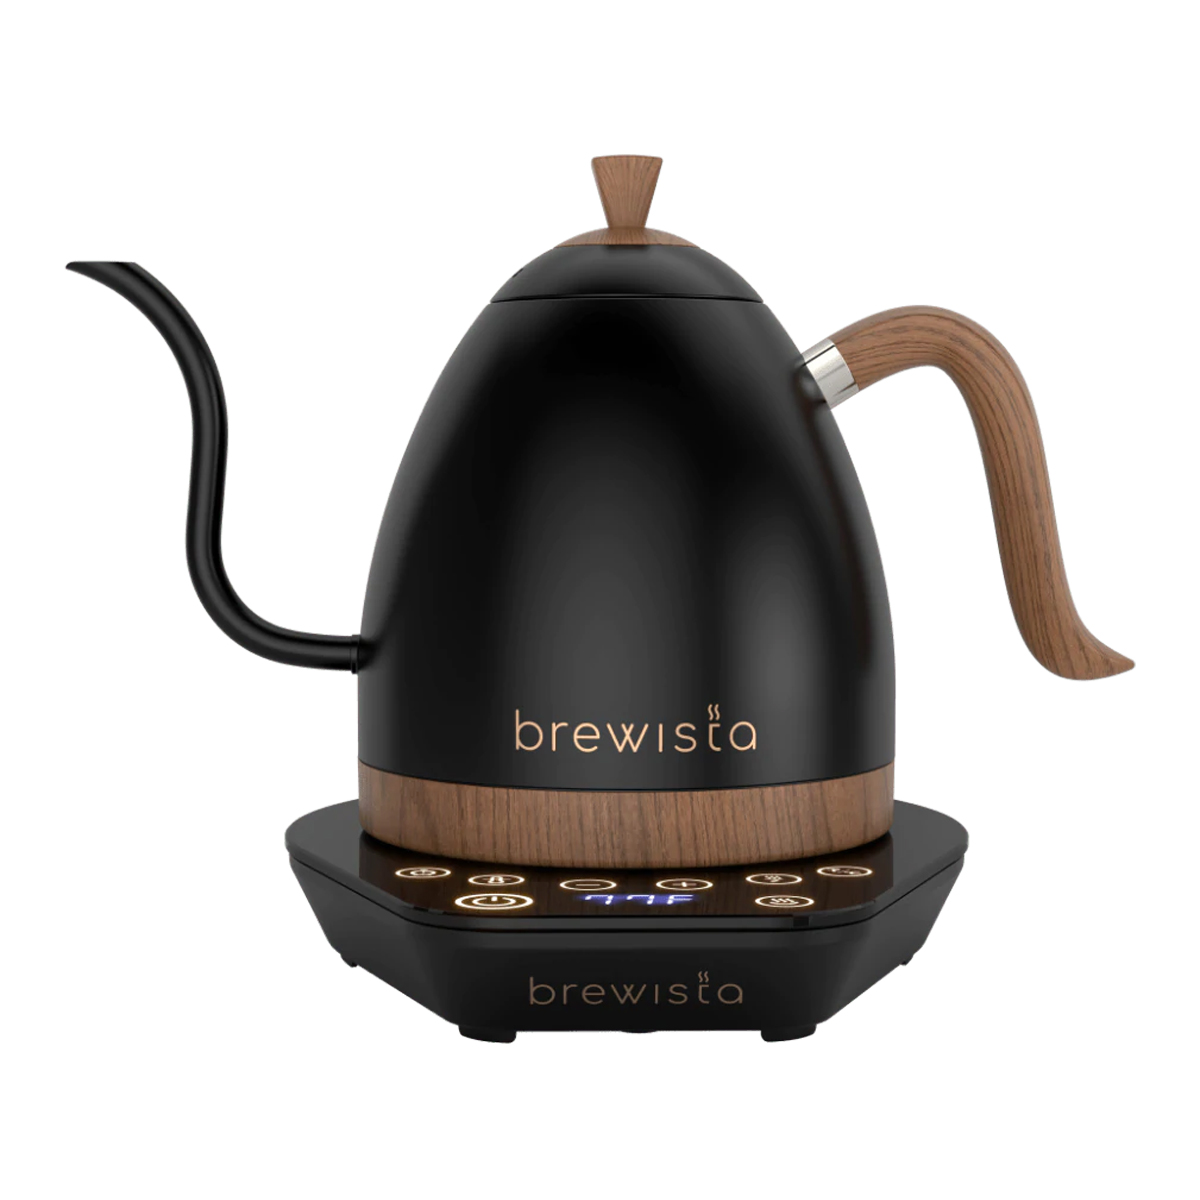  Brewista Artisan Electric Gooseneck Kettle, 1 Liter, For Pour  Over Coffee, Brewing Tea, LCD Panel, Precise Digital Temperature Selection,  Flash Boil and Keep Warm Settings (White Iridescent): Home & Kitchen